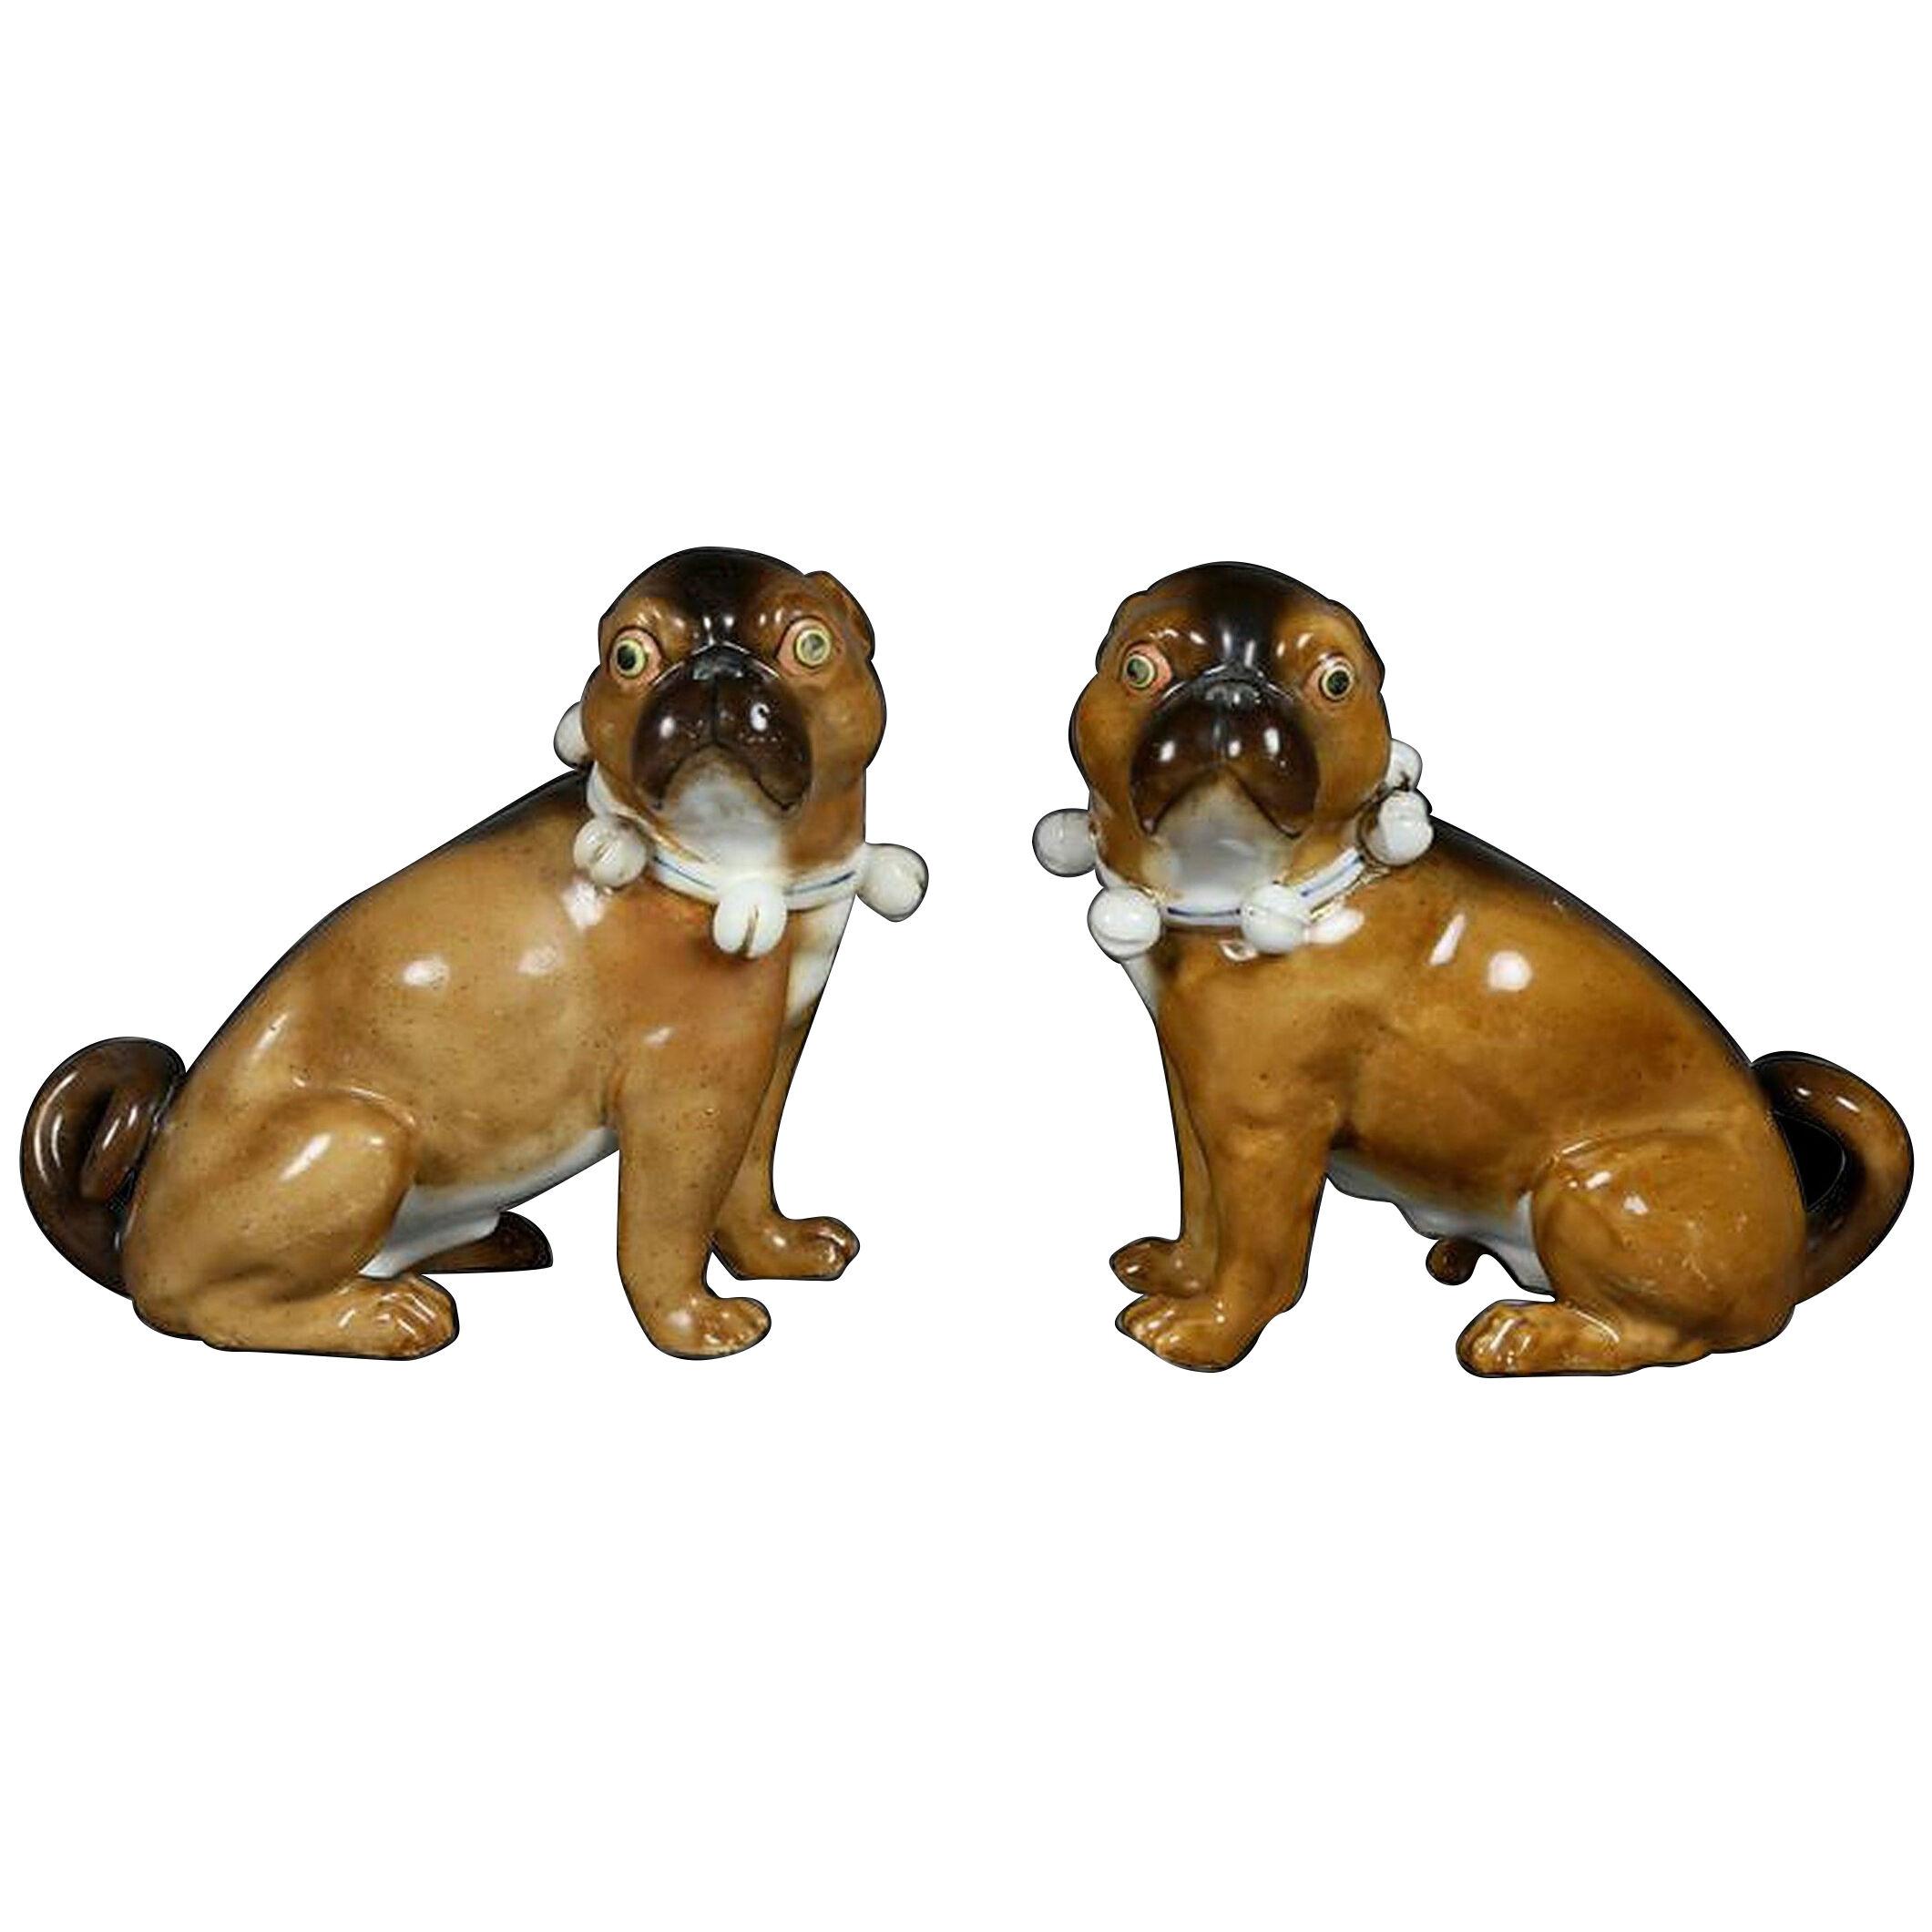 German Porcelain Figures of Seated Pugs - a Pair